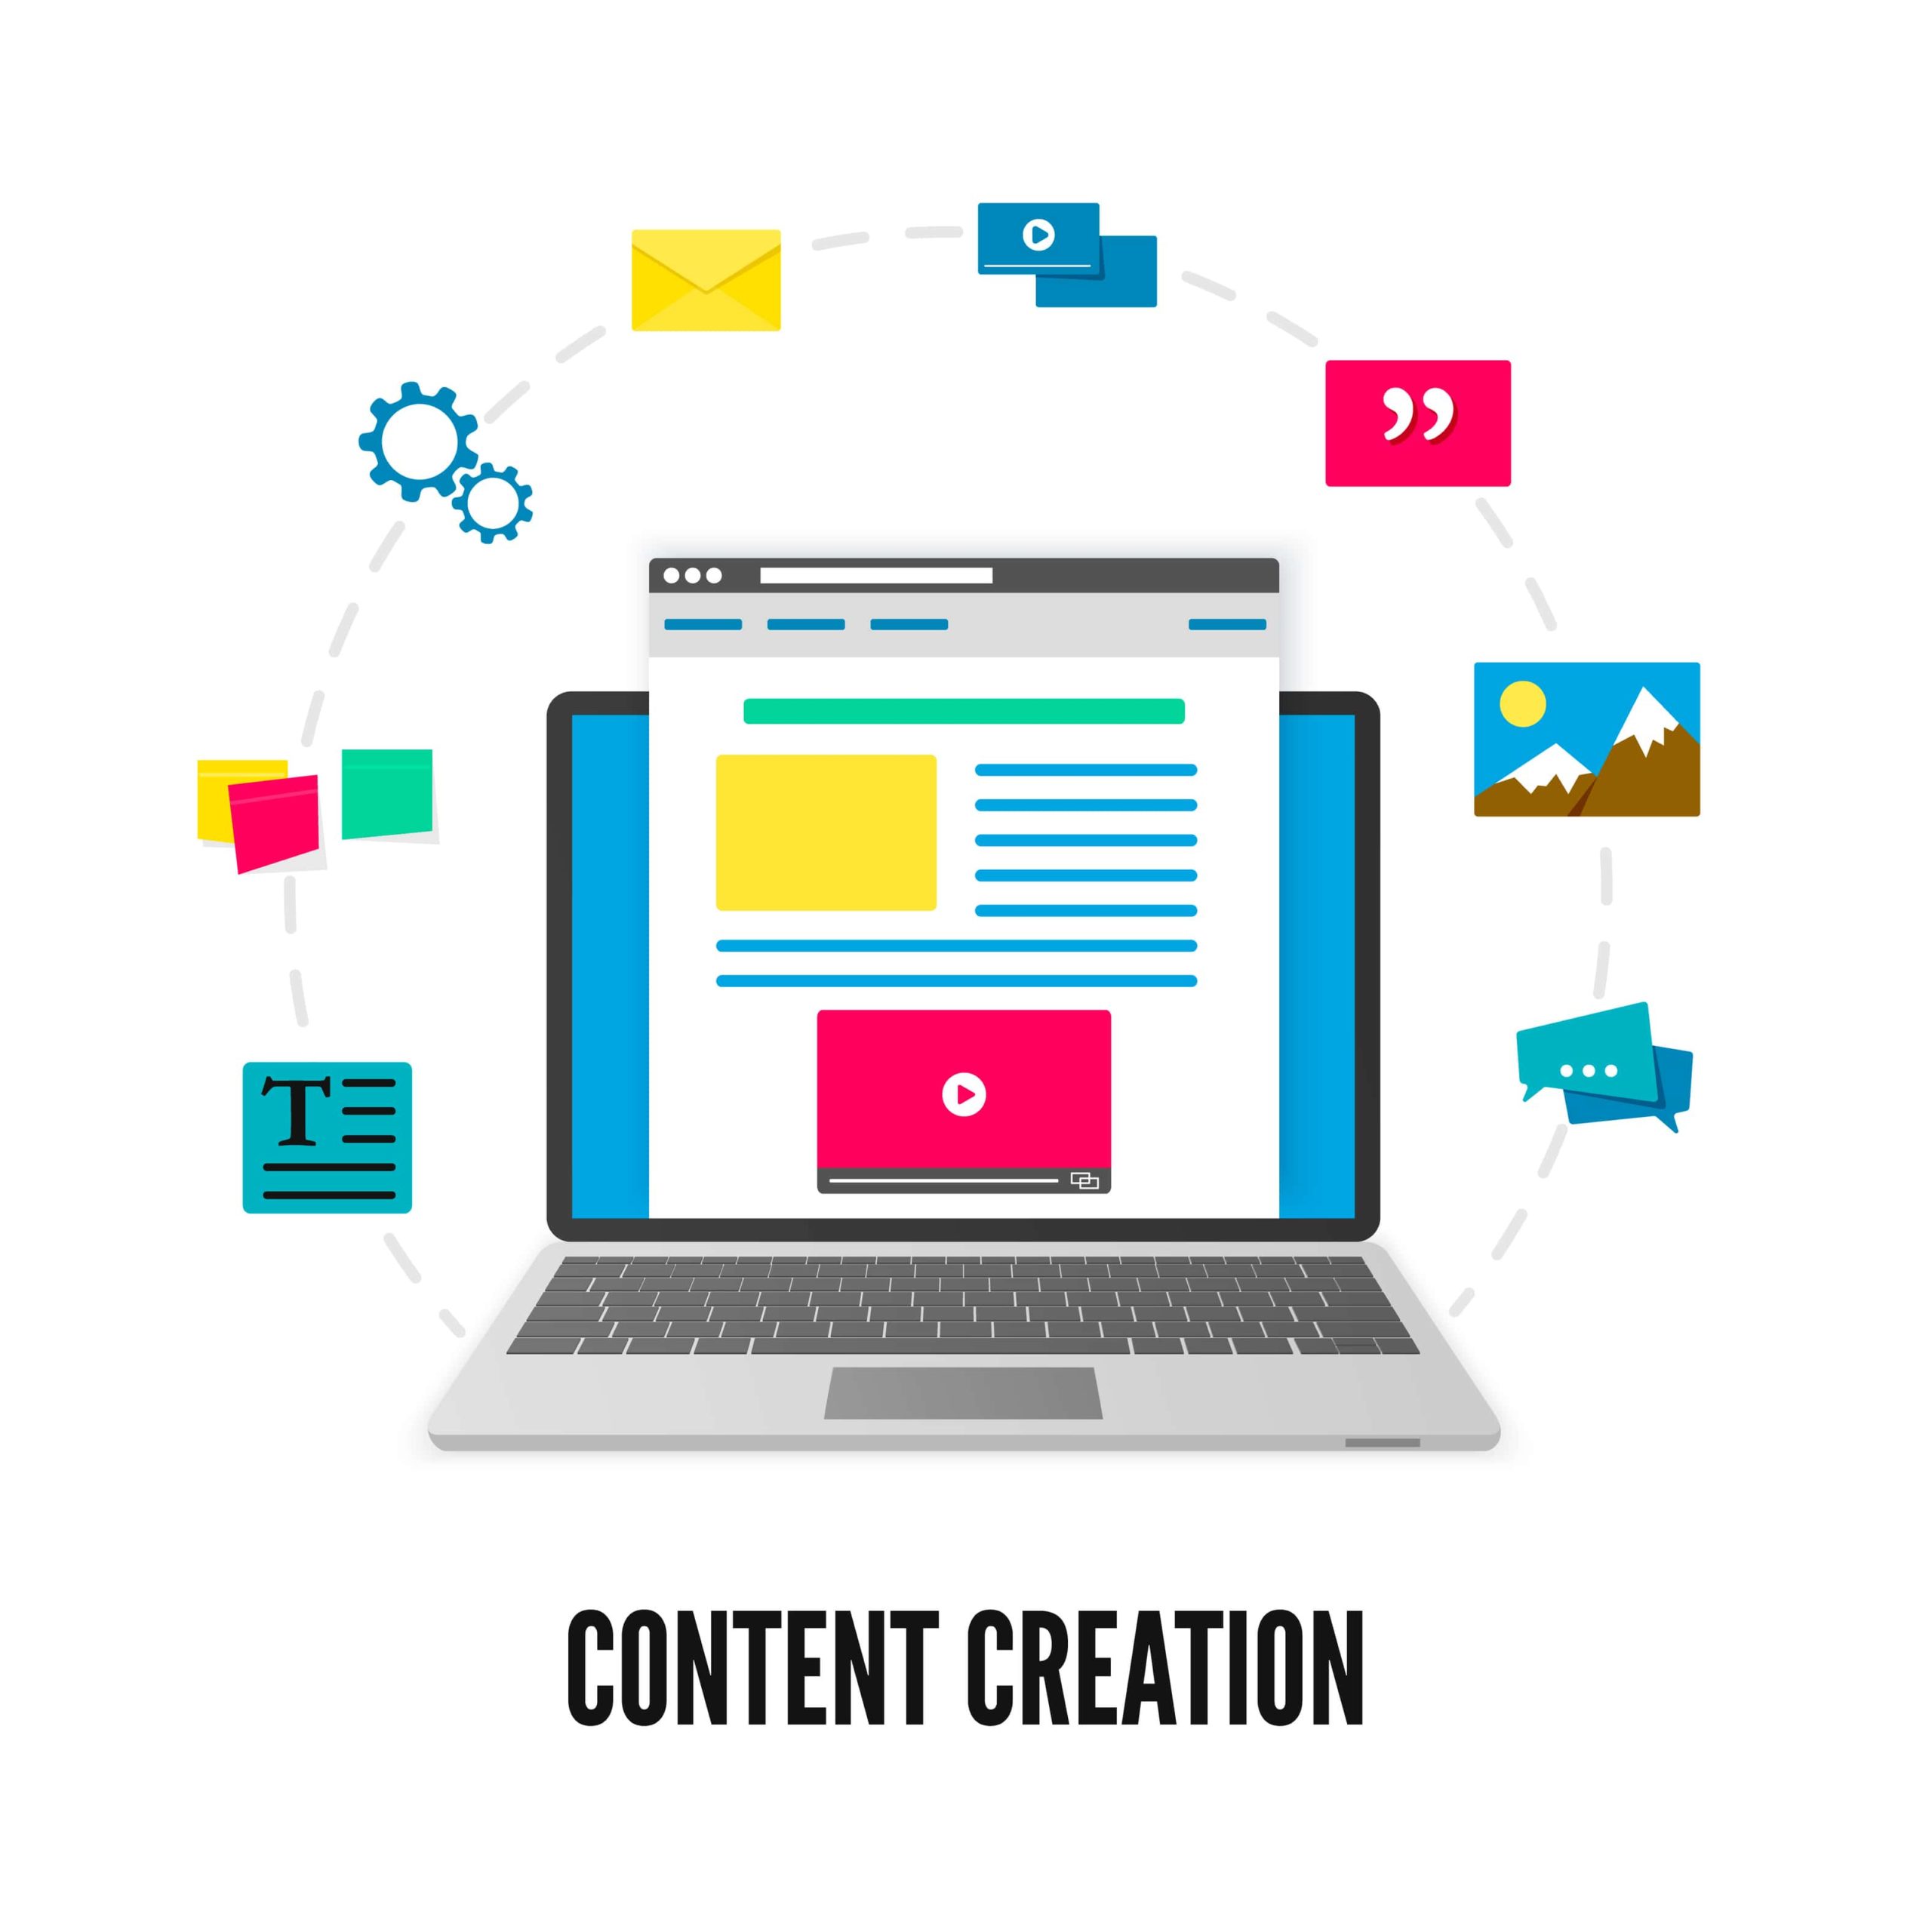 How to Create High-Quality Content?